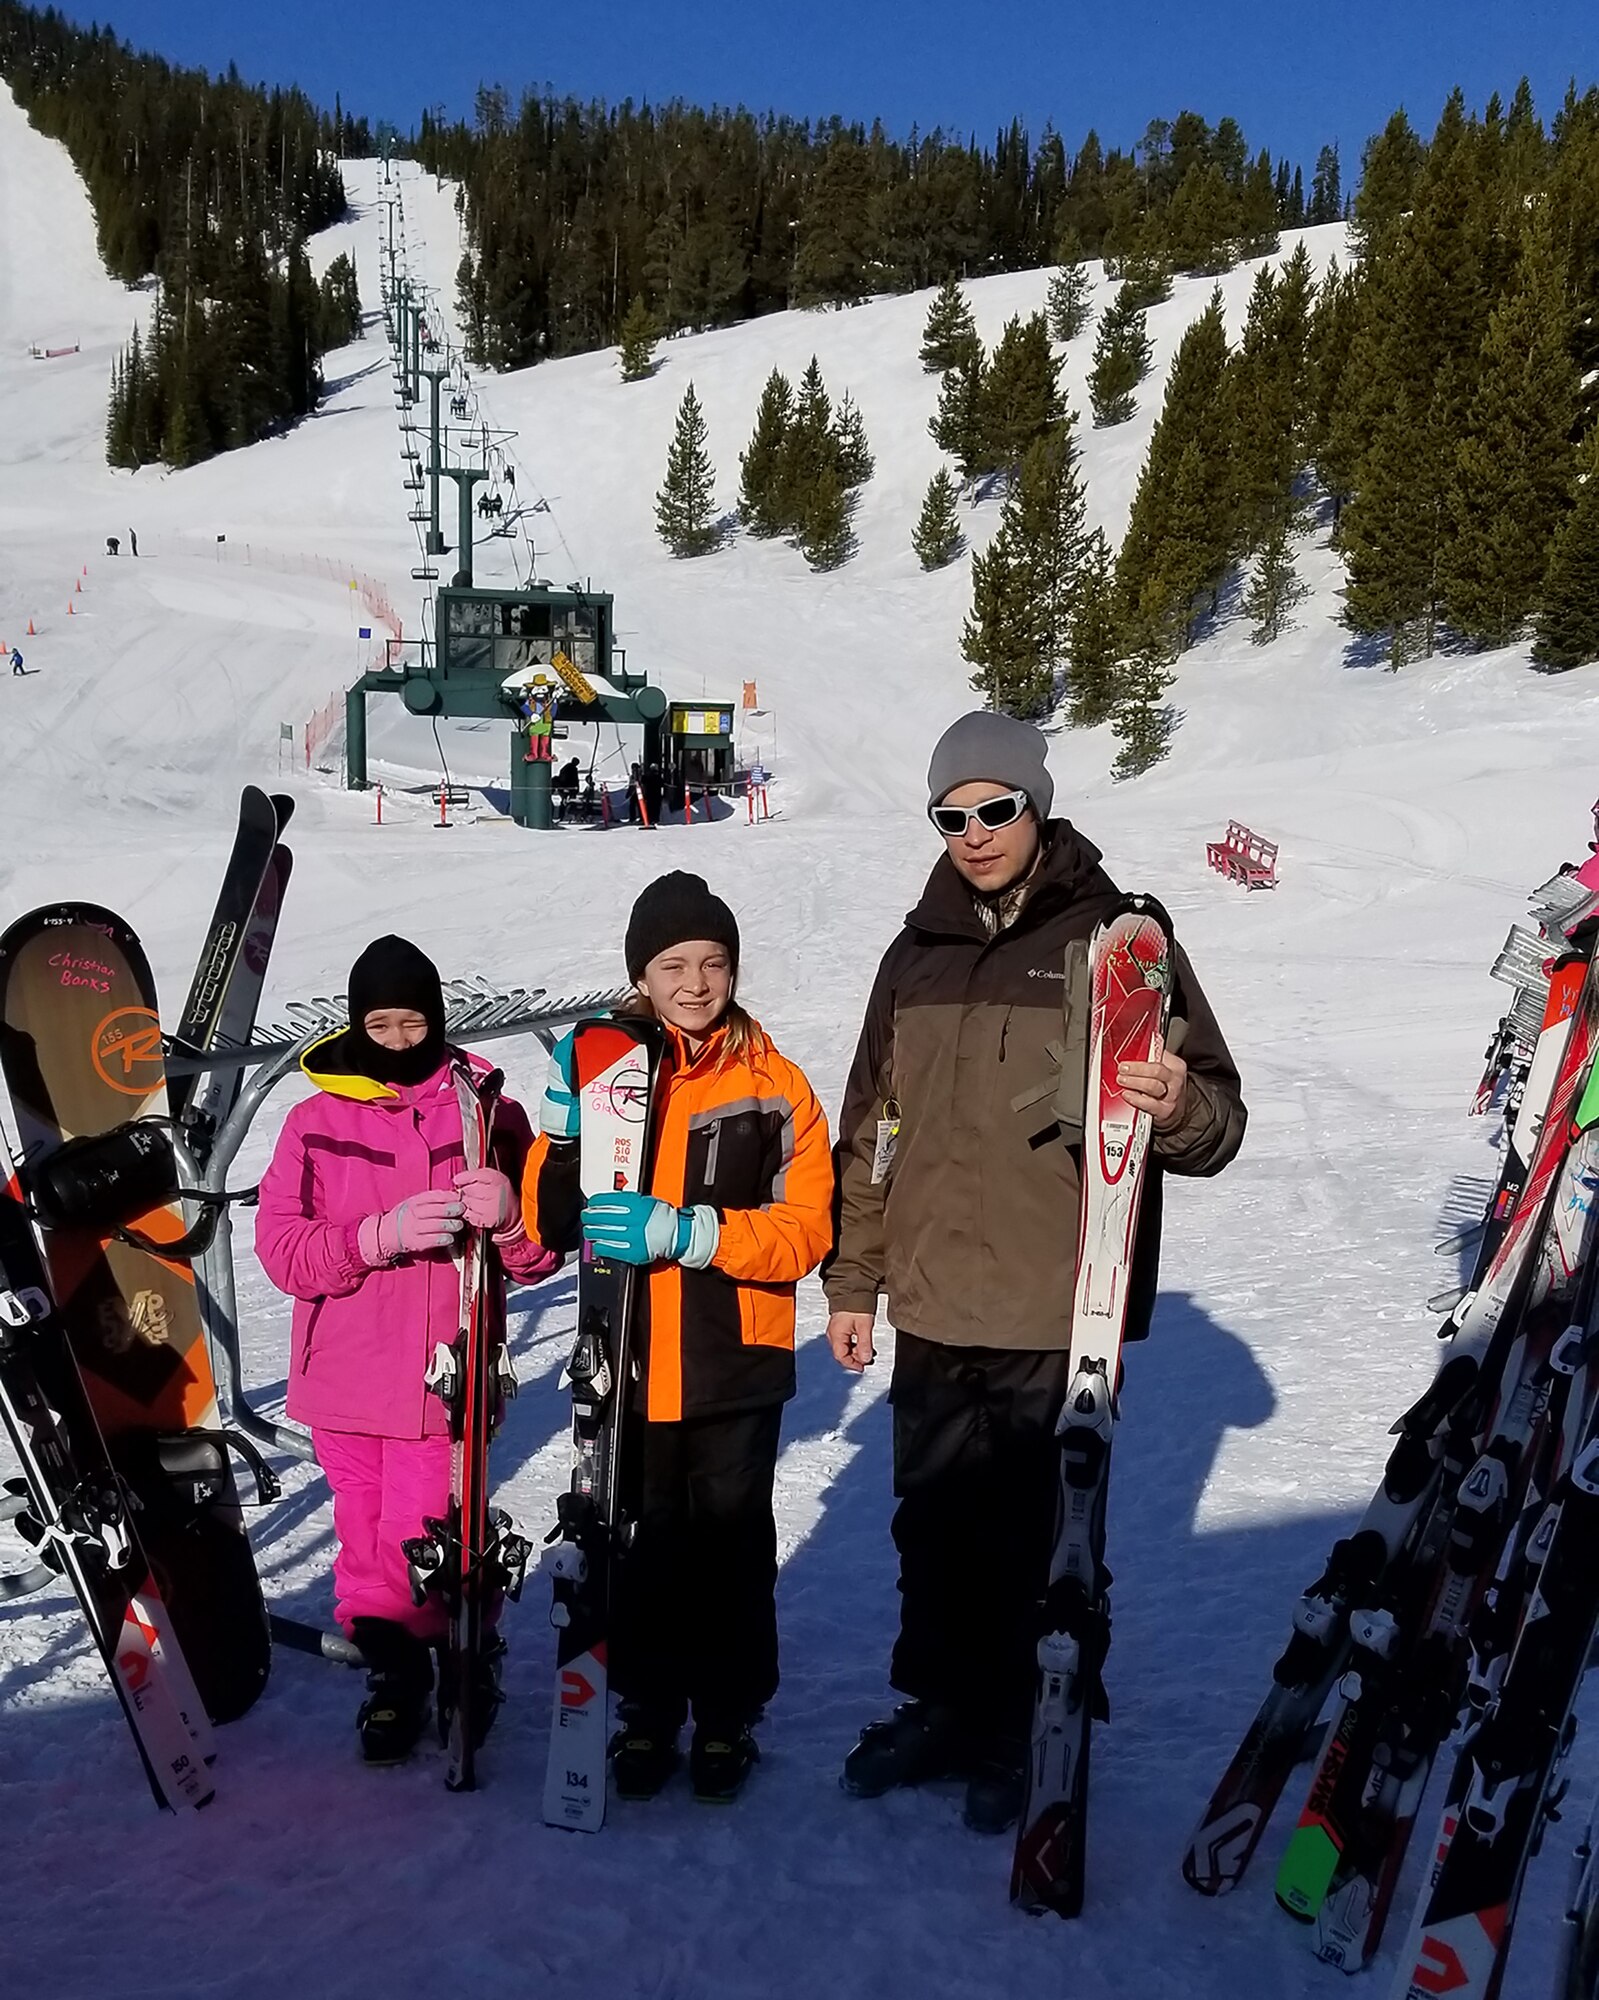 Exceptional Family Member Program participants pose for a photo during an Adaptive Ski Adventure at Showdown Ski Area March 11, 2018. The EFM Program offers EFMP families the opportunity to partake in various activities/camps throughout the year. (Courtesy photo)